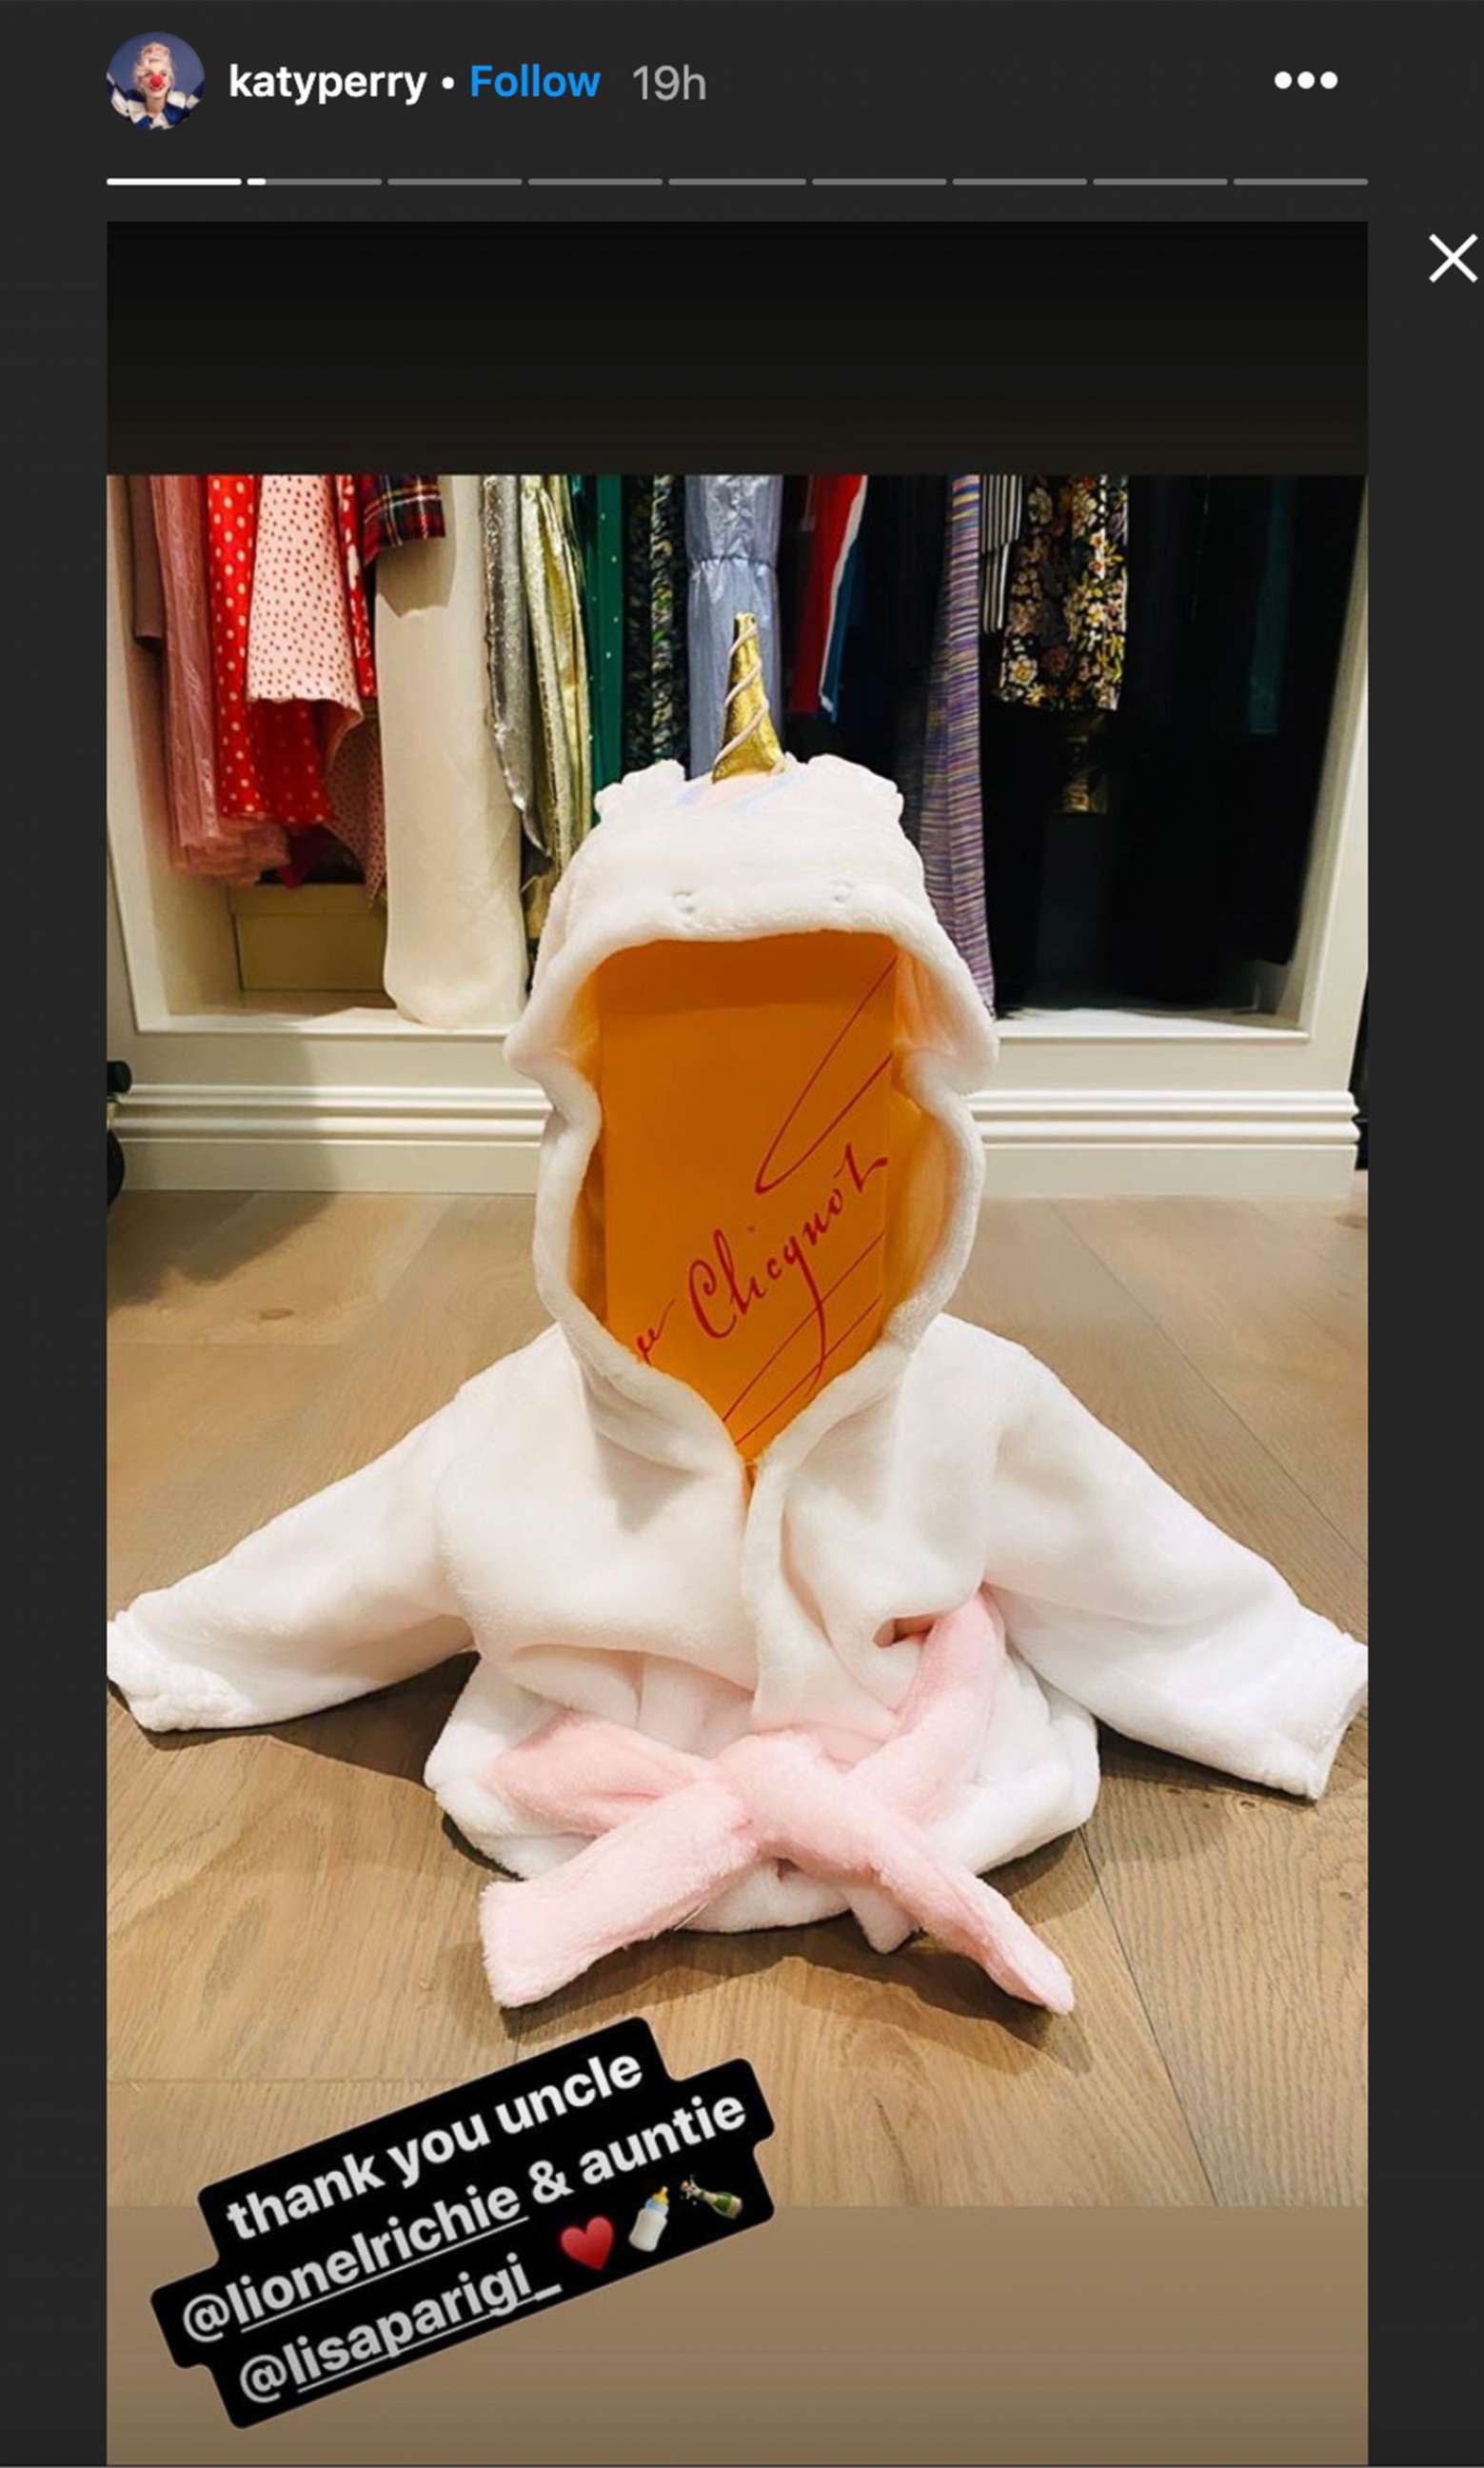 PHOTO: A bottle of champagne gifted to Katy Perry by Lionel Ritchie is seen in an image posted by Perry in her Instagram story on Aug. 1, 2020.